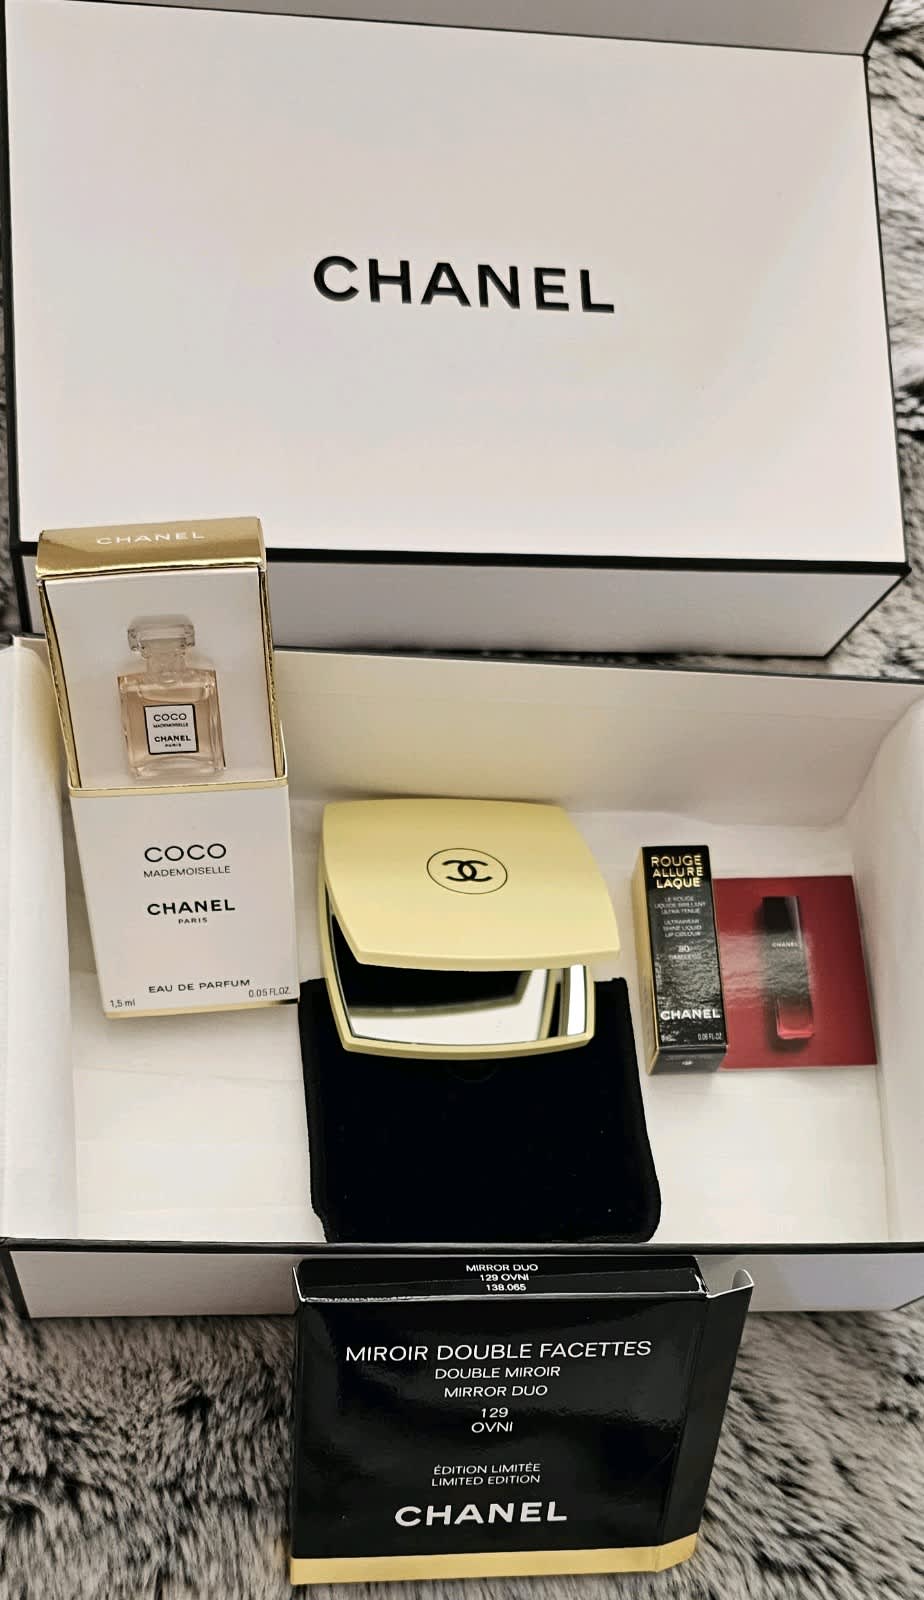 CHANEL COCO MADEMOISELLE BATH SOAP NEW SEALED GIFT WRAPPED & GIFT BAG  SEE PHOTOS